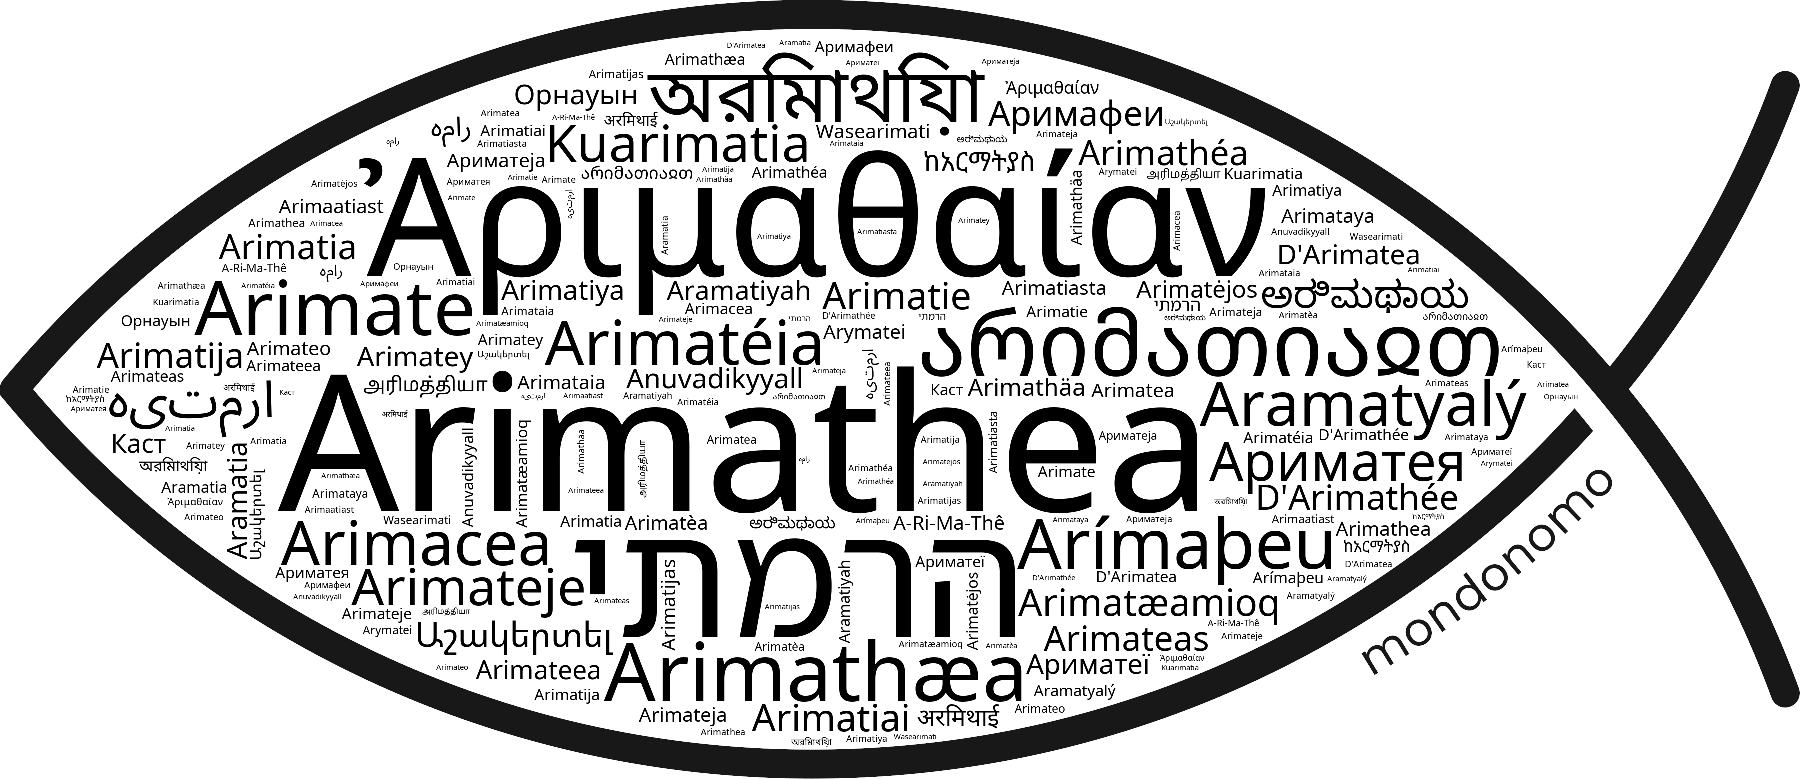 Name Arimathea in the world's Bibles